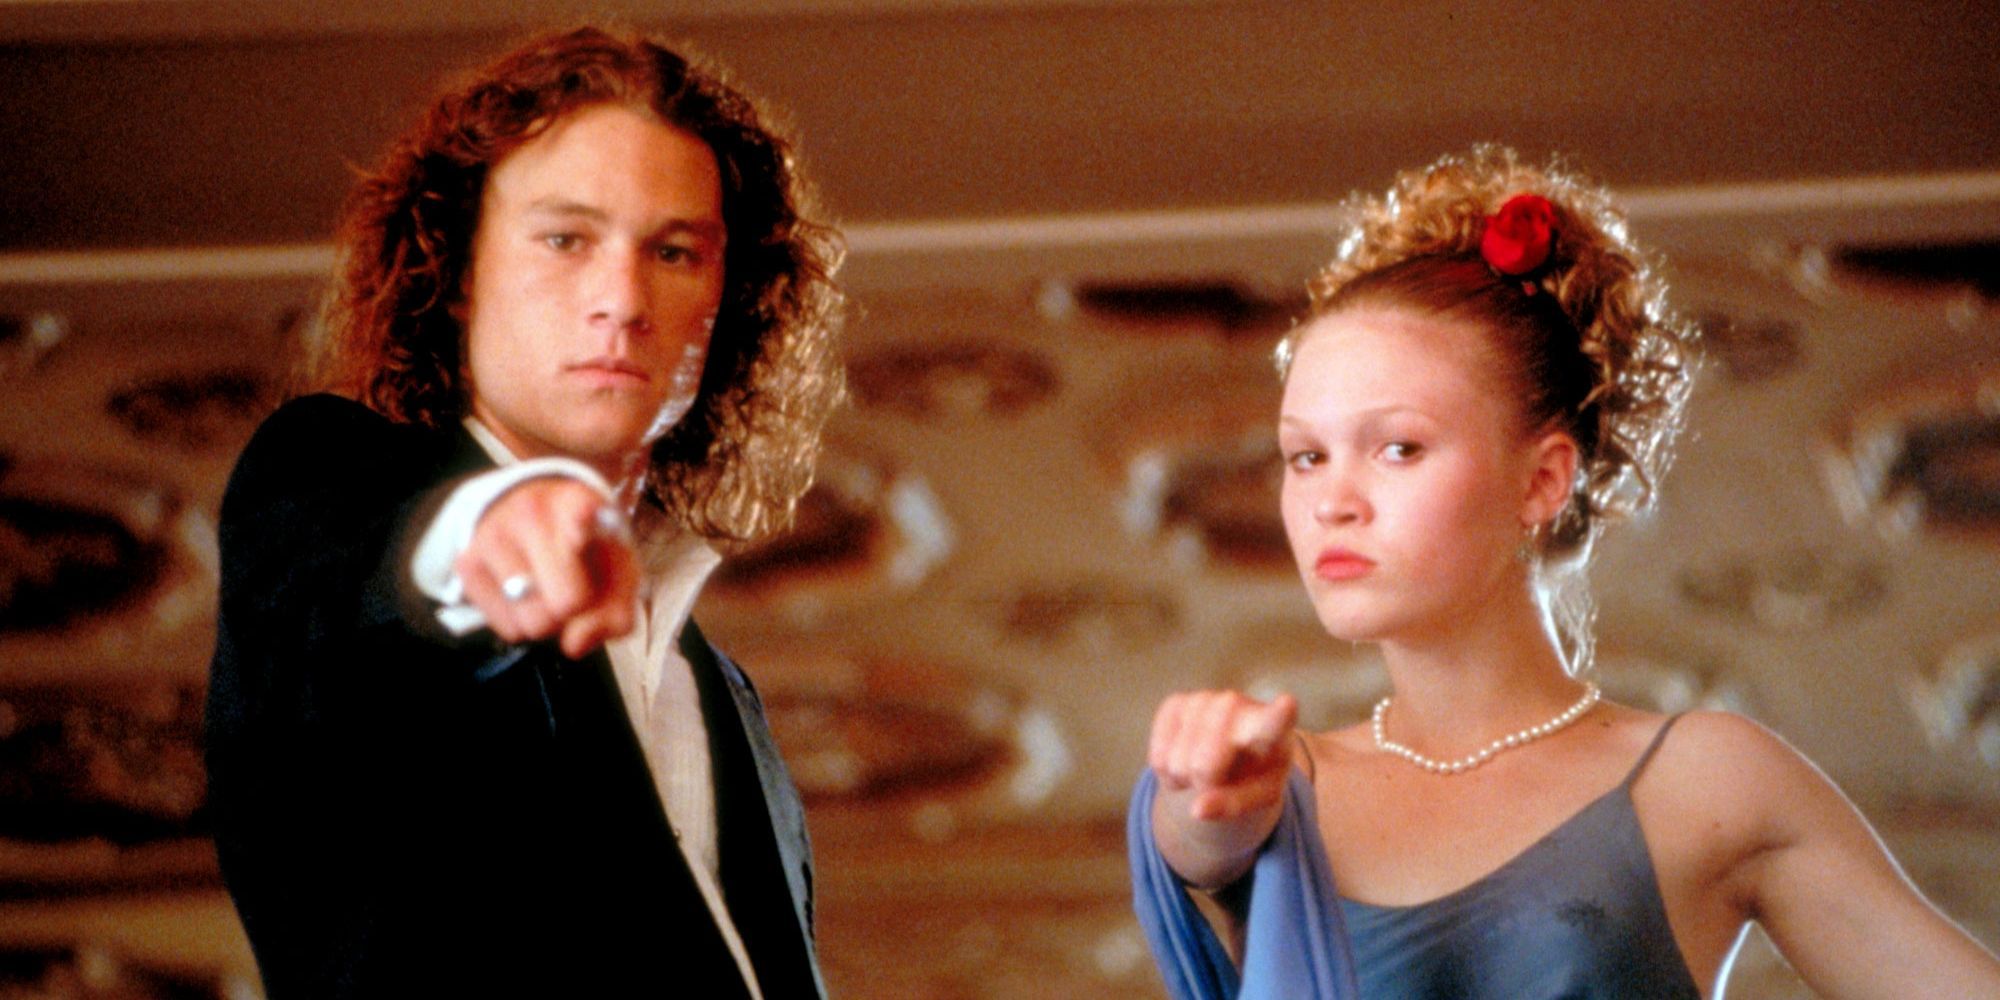 Patrick and Kat from 10 Things I Hate About You standing together